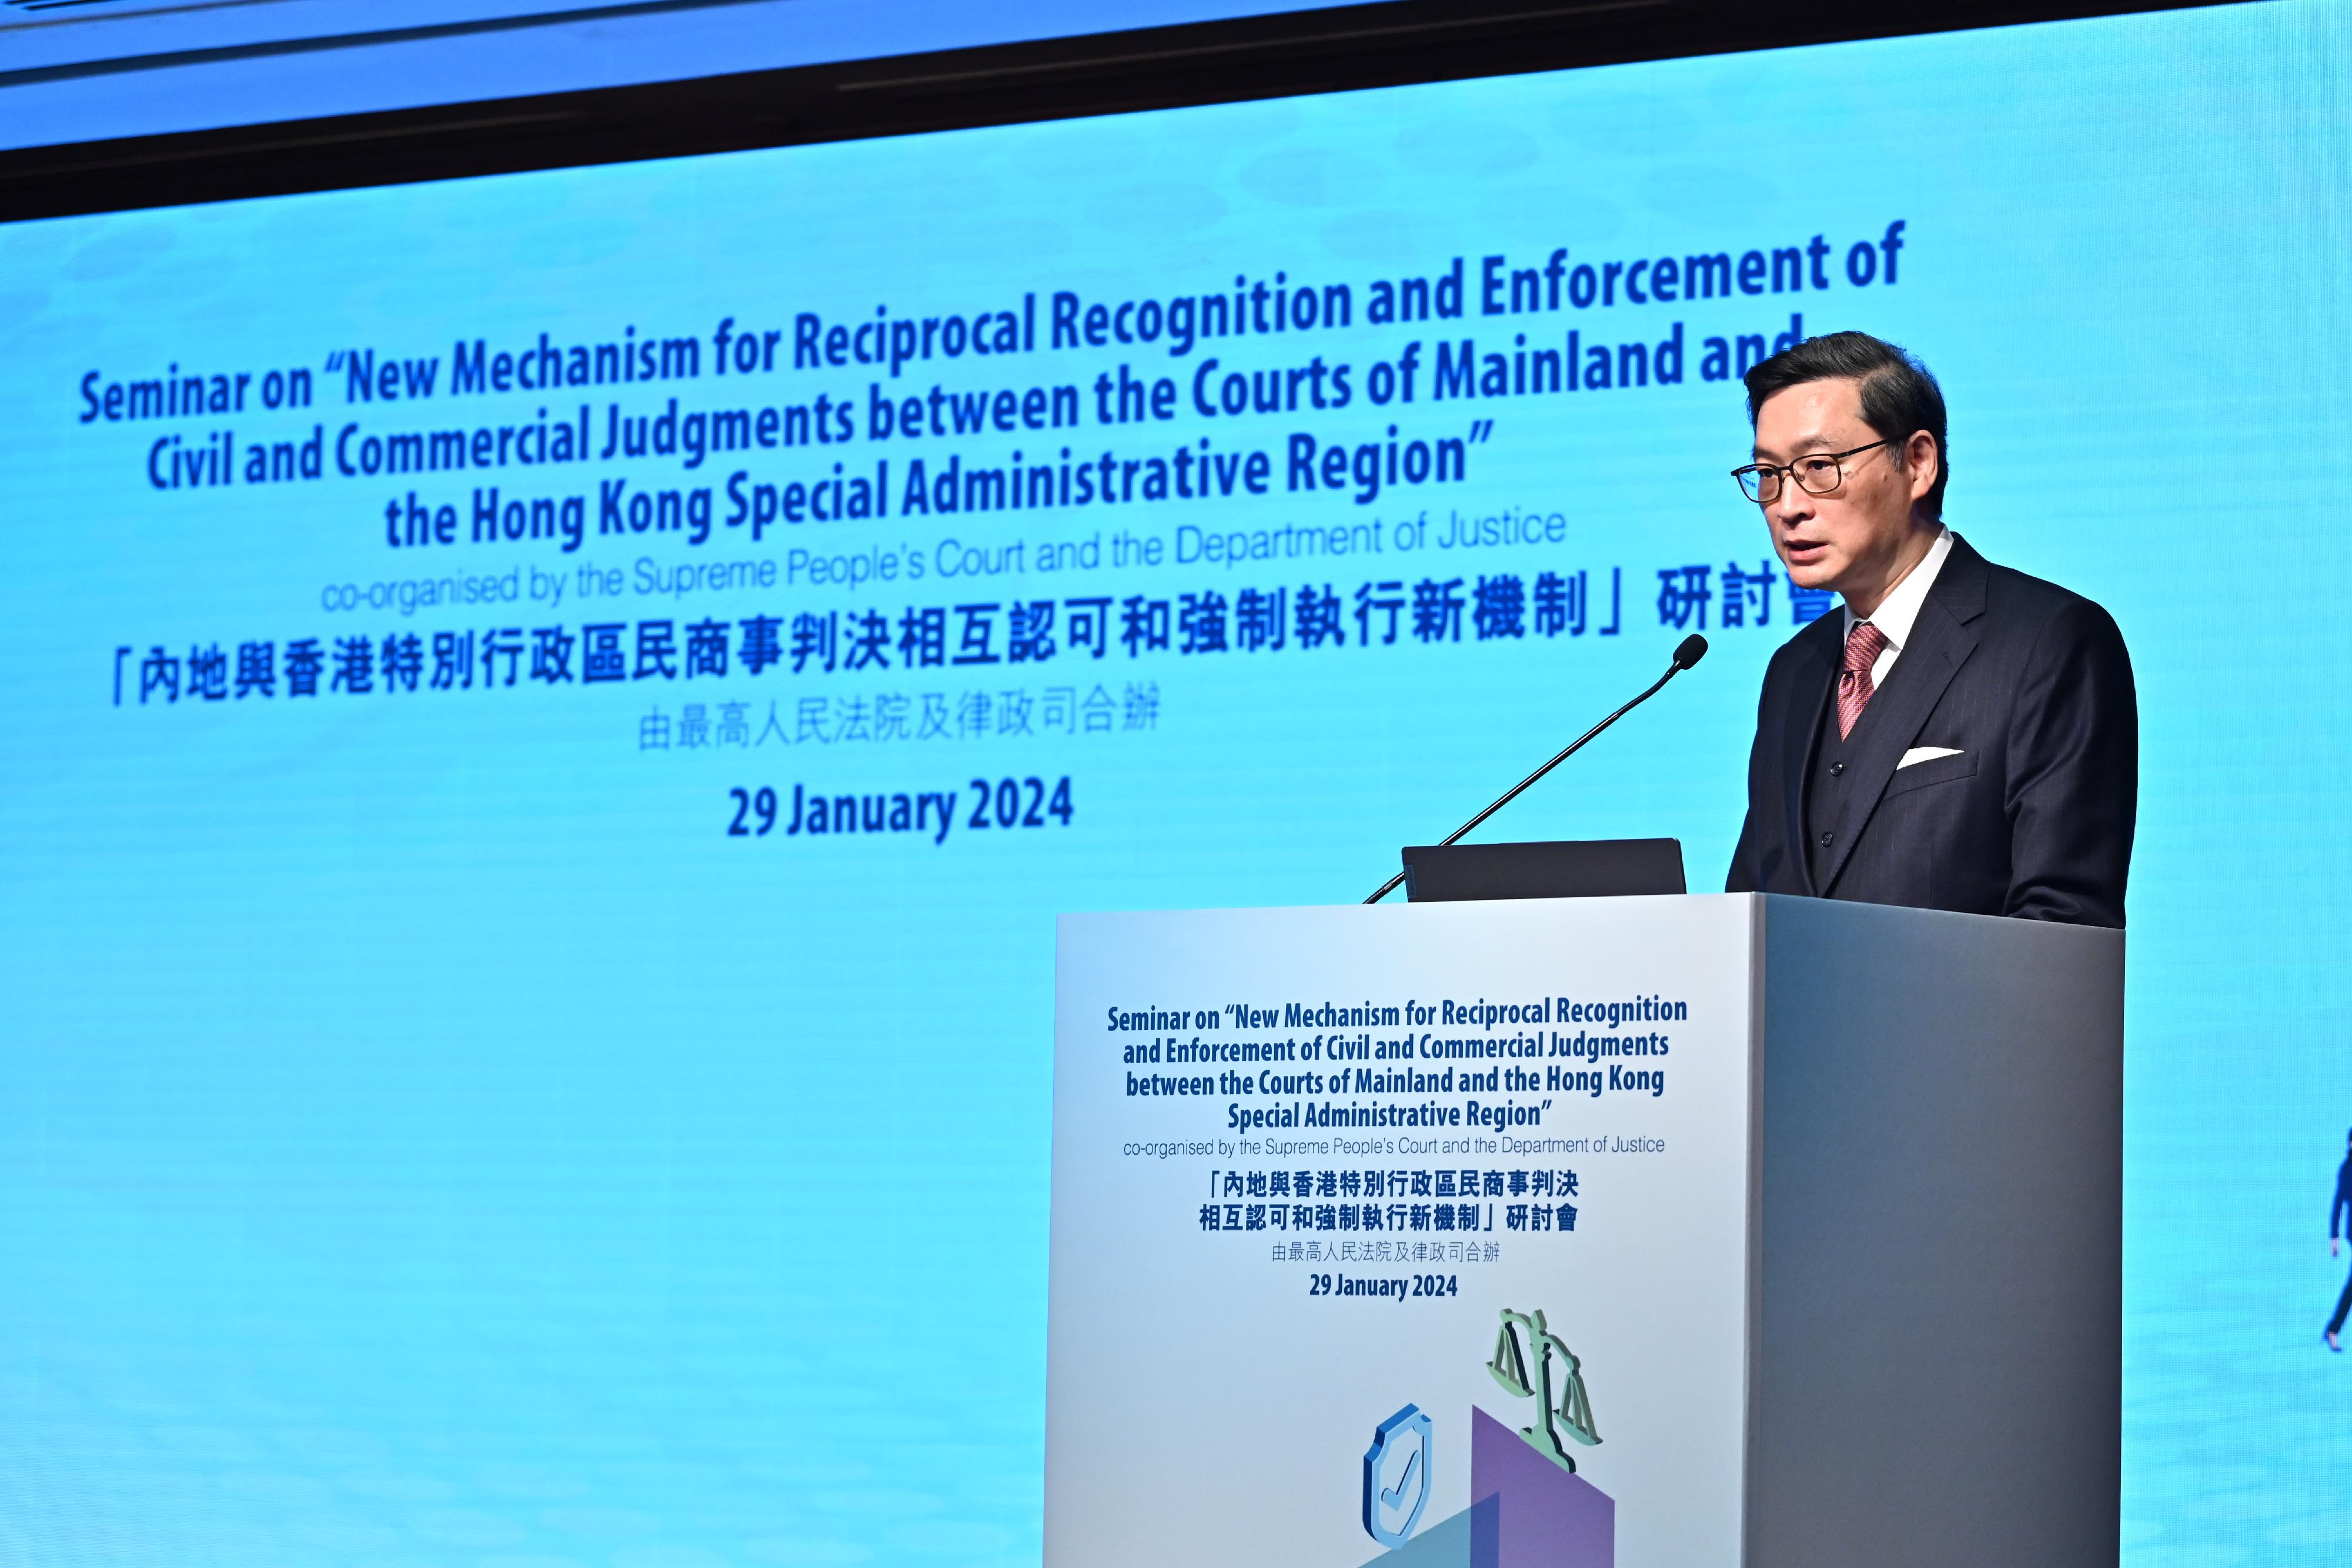 The seminar on "New Mechanism for Reciprocal Recognition and Enforcement of Civil and Commercial Judgments between the Courts of Mainland and the Hong Kong Special Administrative Region" co-organised by the Supreme People's Court and the Department of Justice was held today (January 29). Photo shows the Chief Judge of the High Court, Mr Justice Jeremy Poon, delivering his keynote speech.